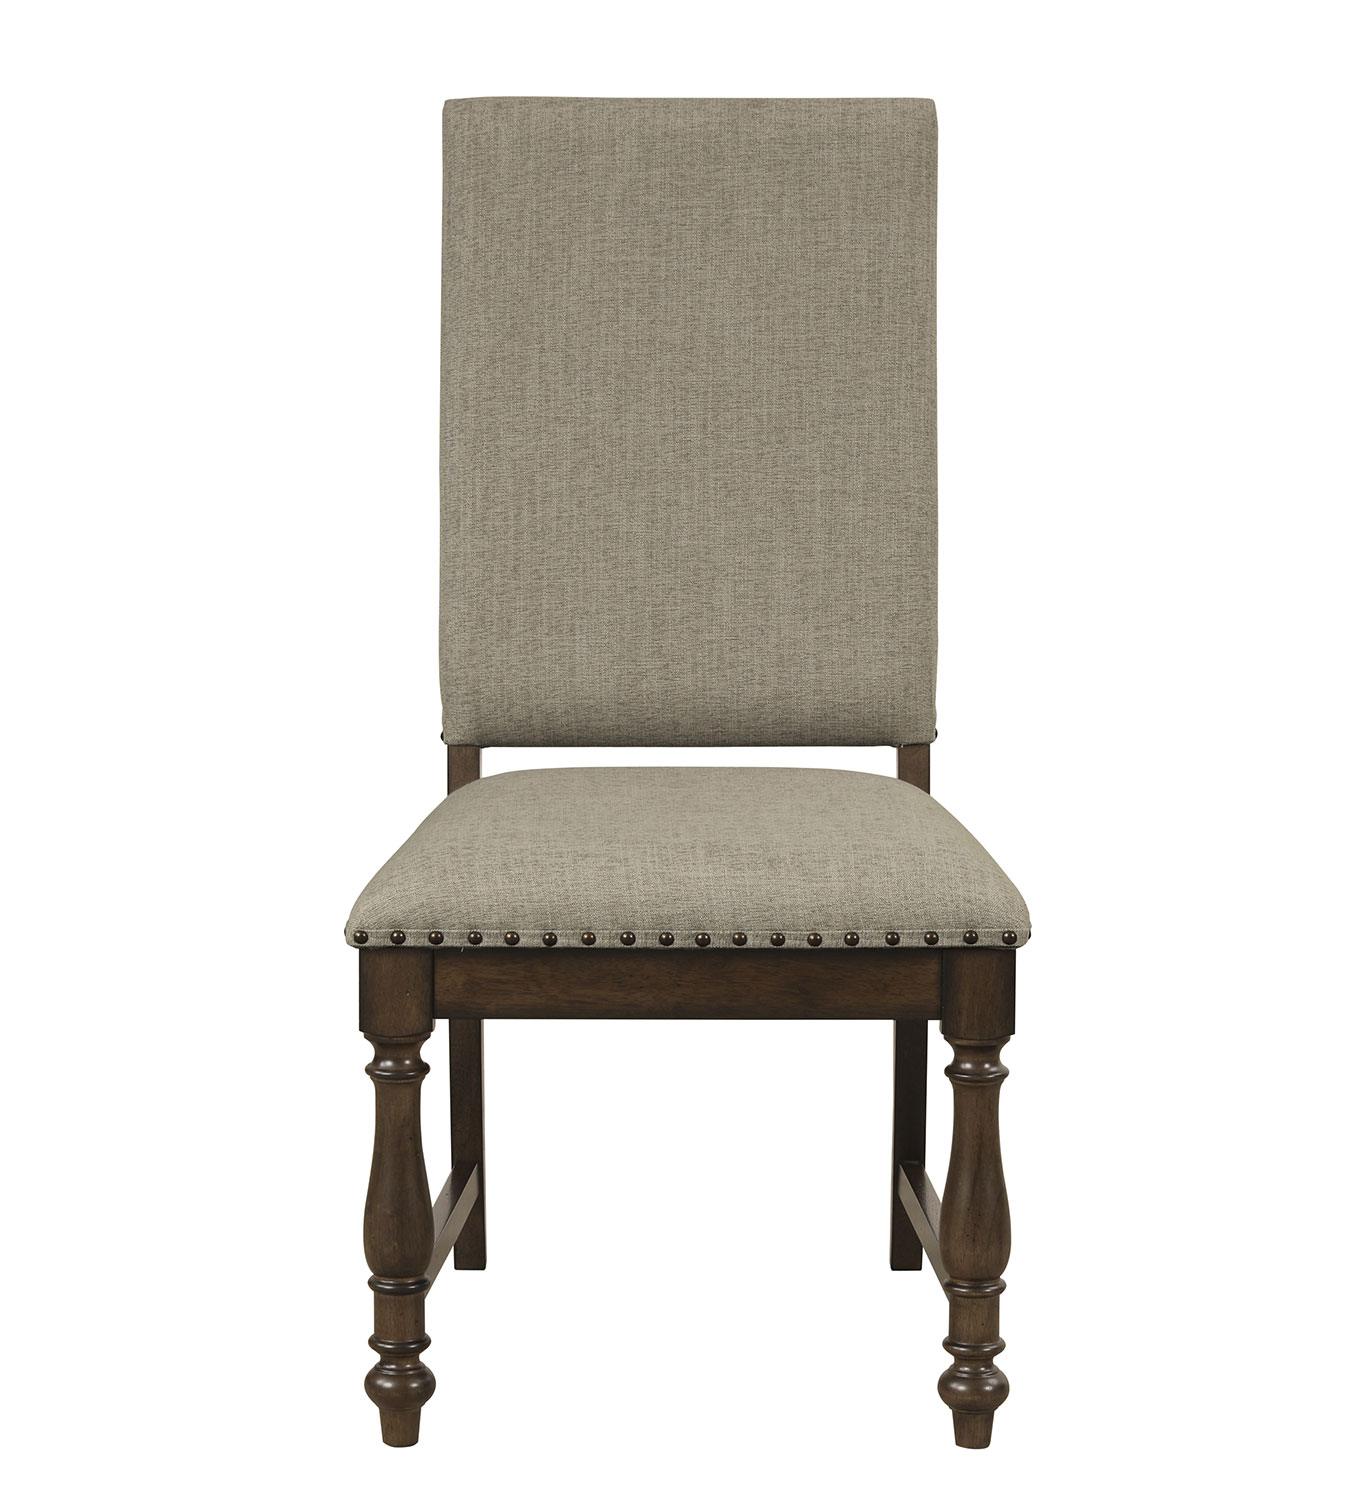 Stonington Dining Side Chair - Brown, Beige